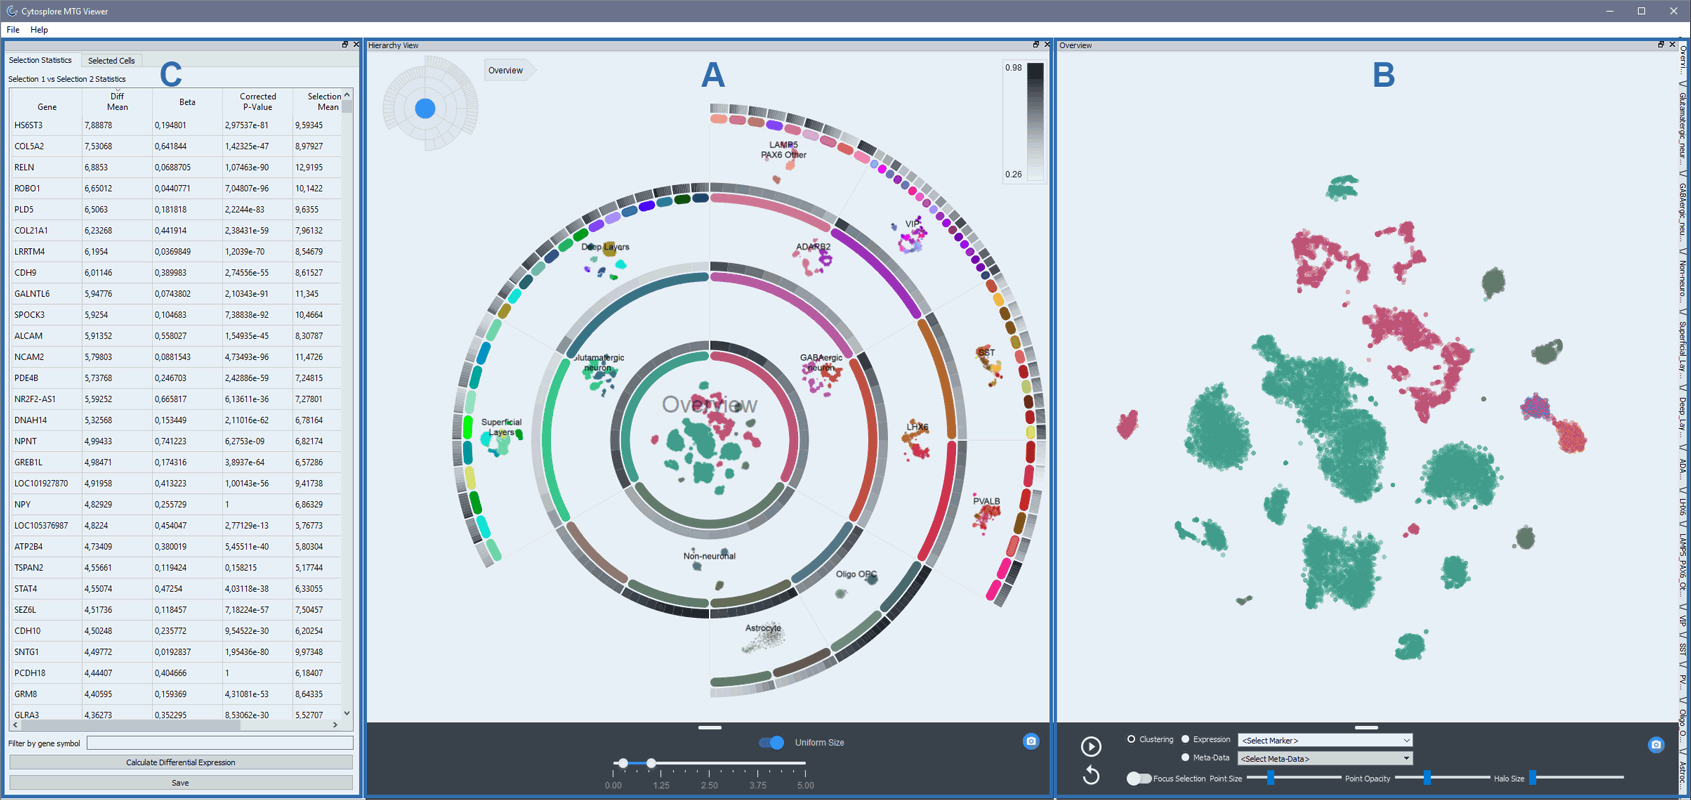 Cytosplore Viewer Overview image